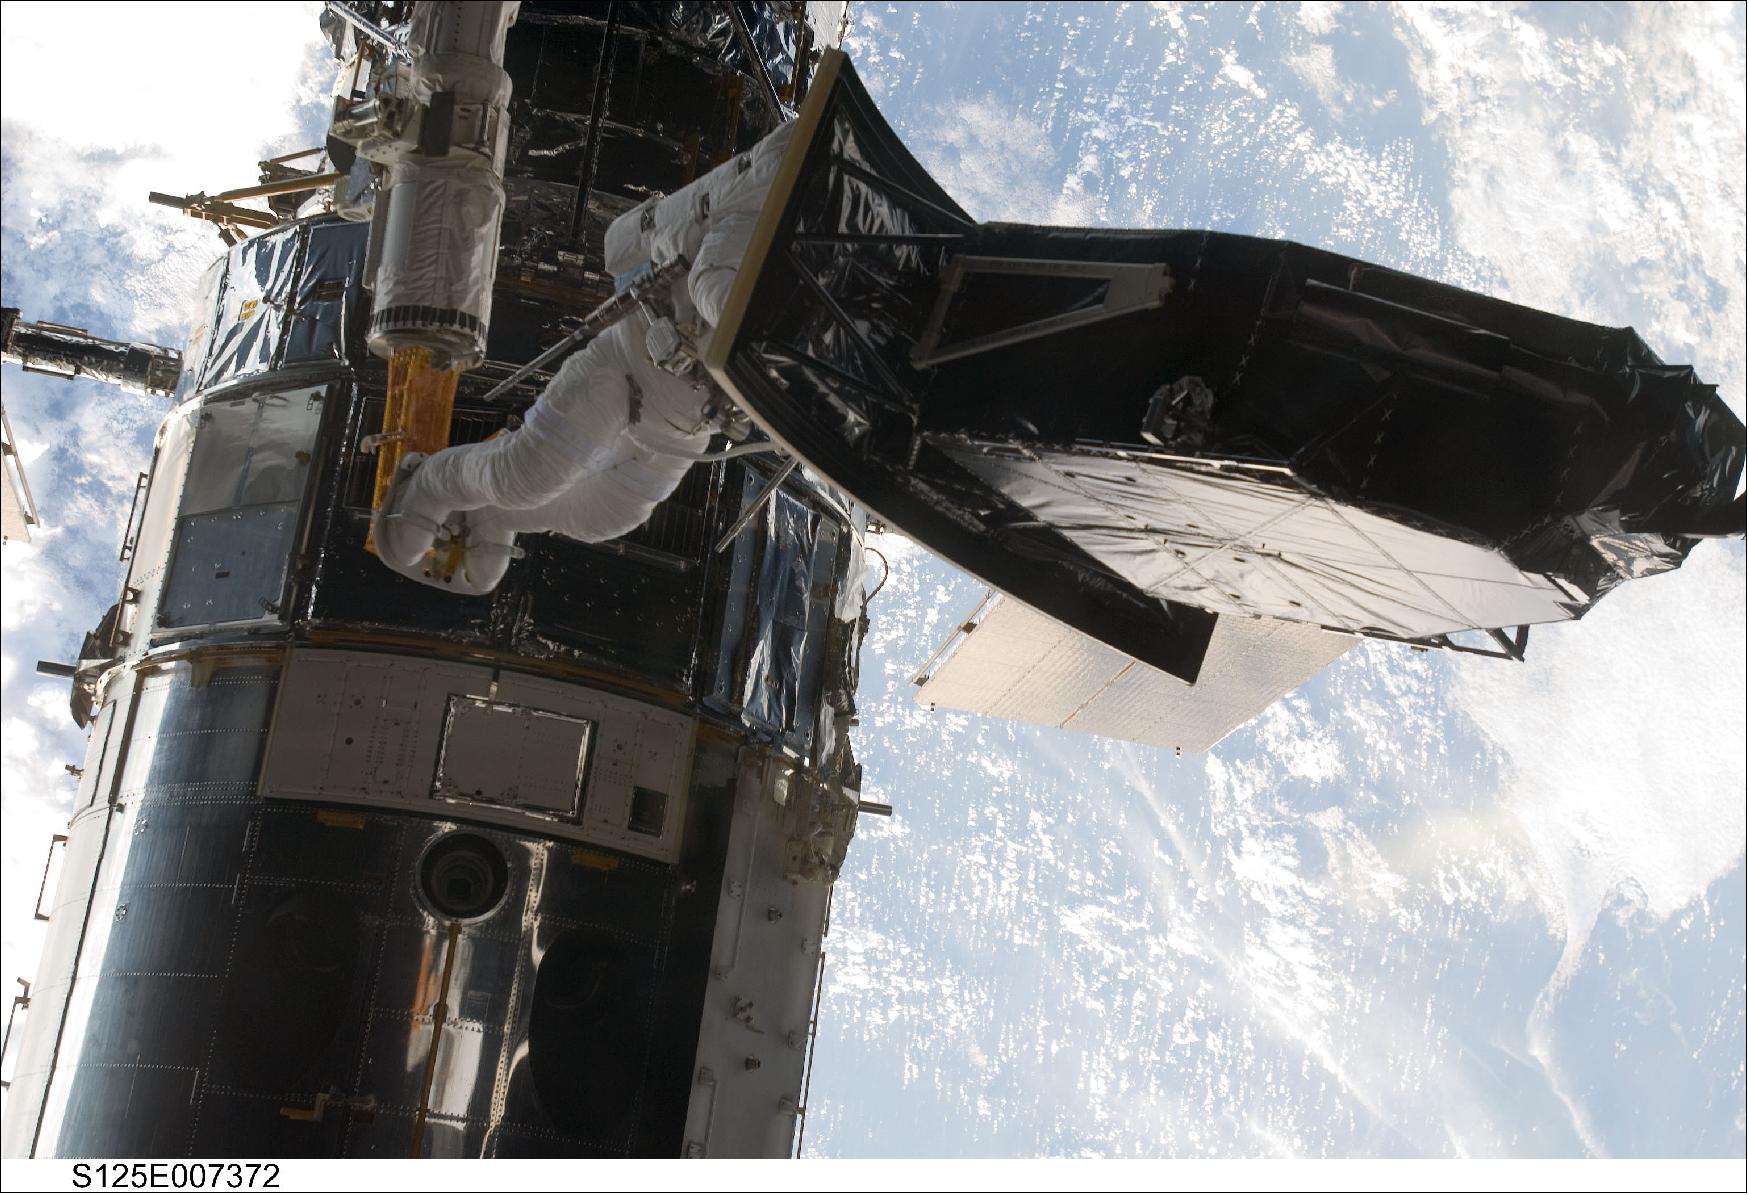 Figure 8: Astronaut Andrew Feustel prepares to install WFC3 (Wide Field Camera 3) on Hubble during Servicing Mission 4 in 2009 (image credit: NASA)